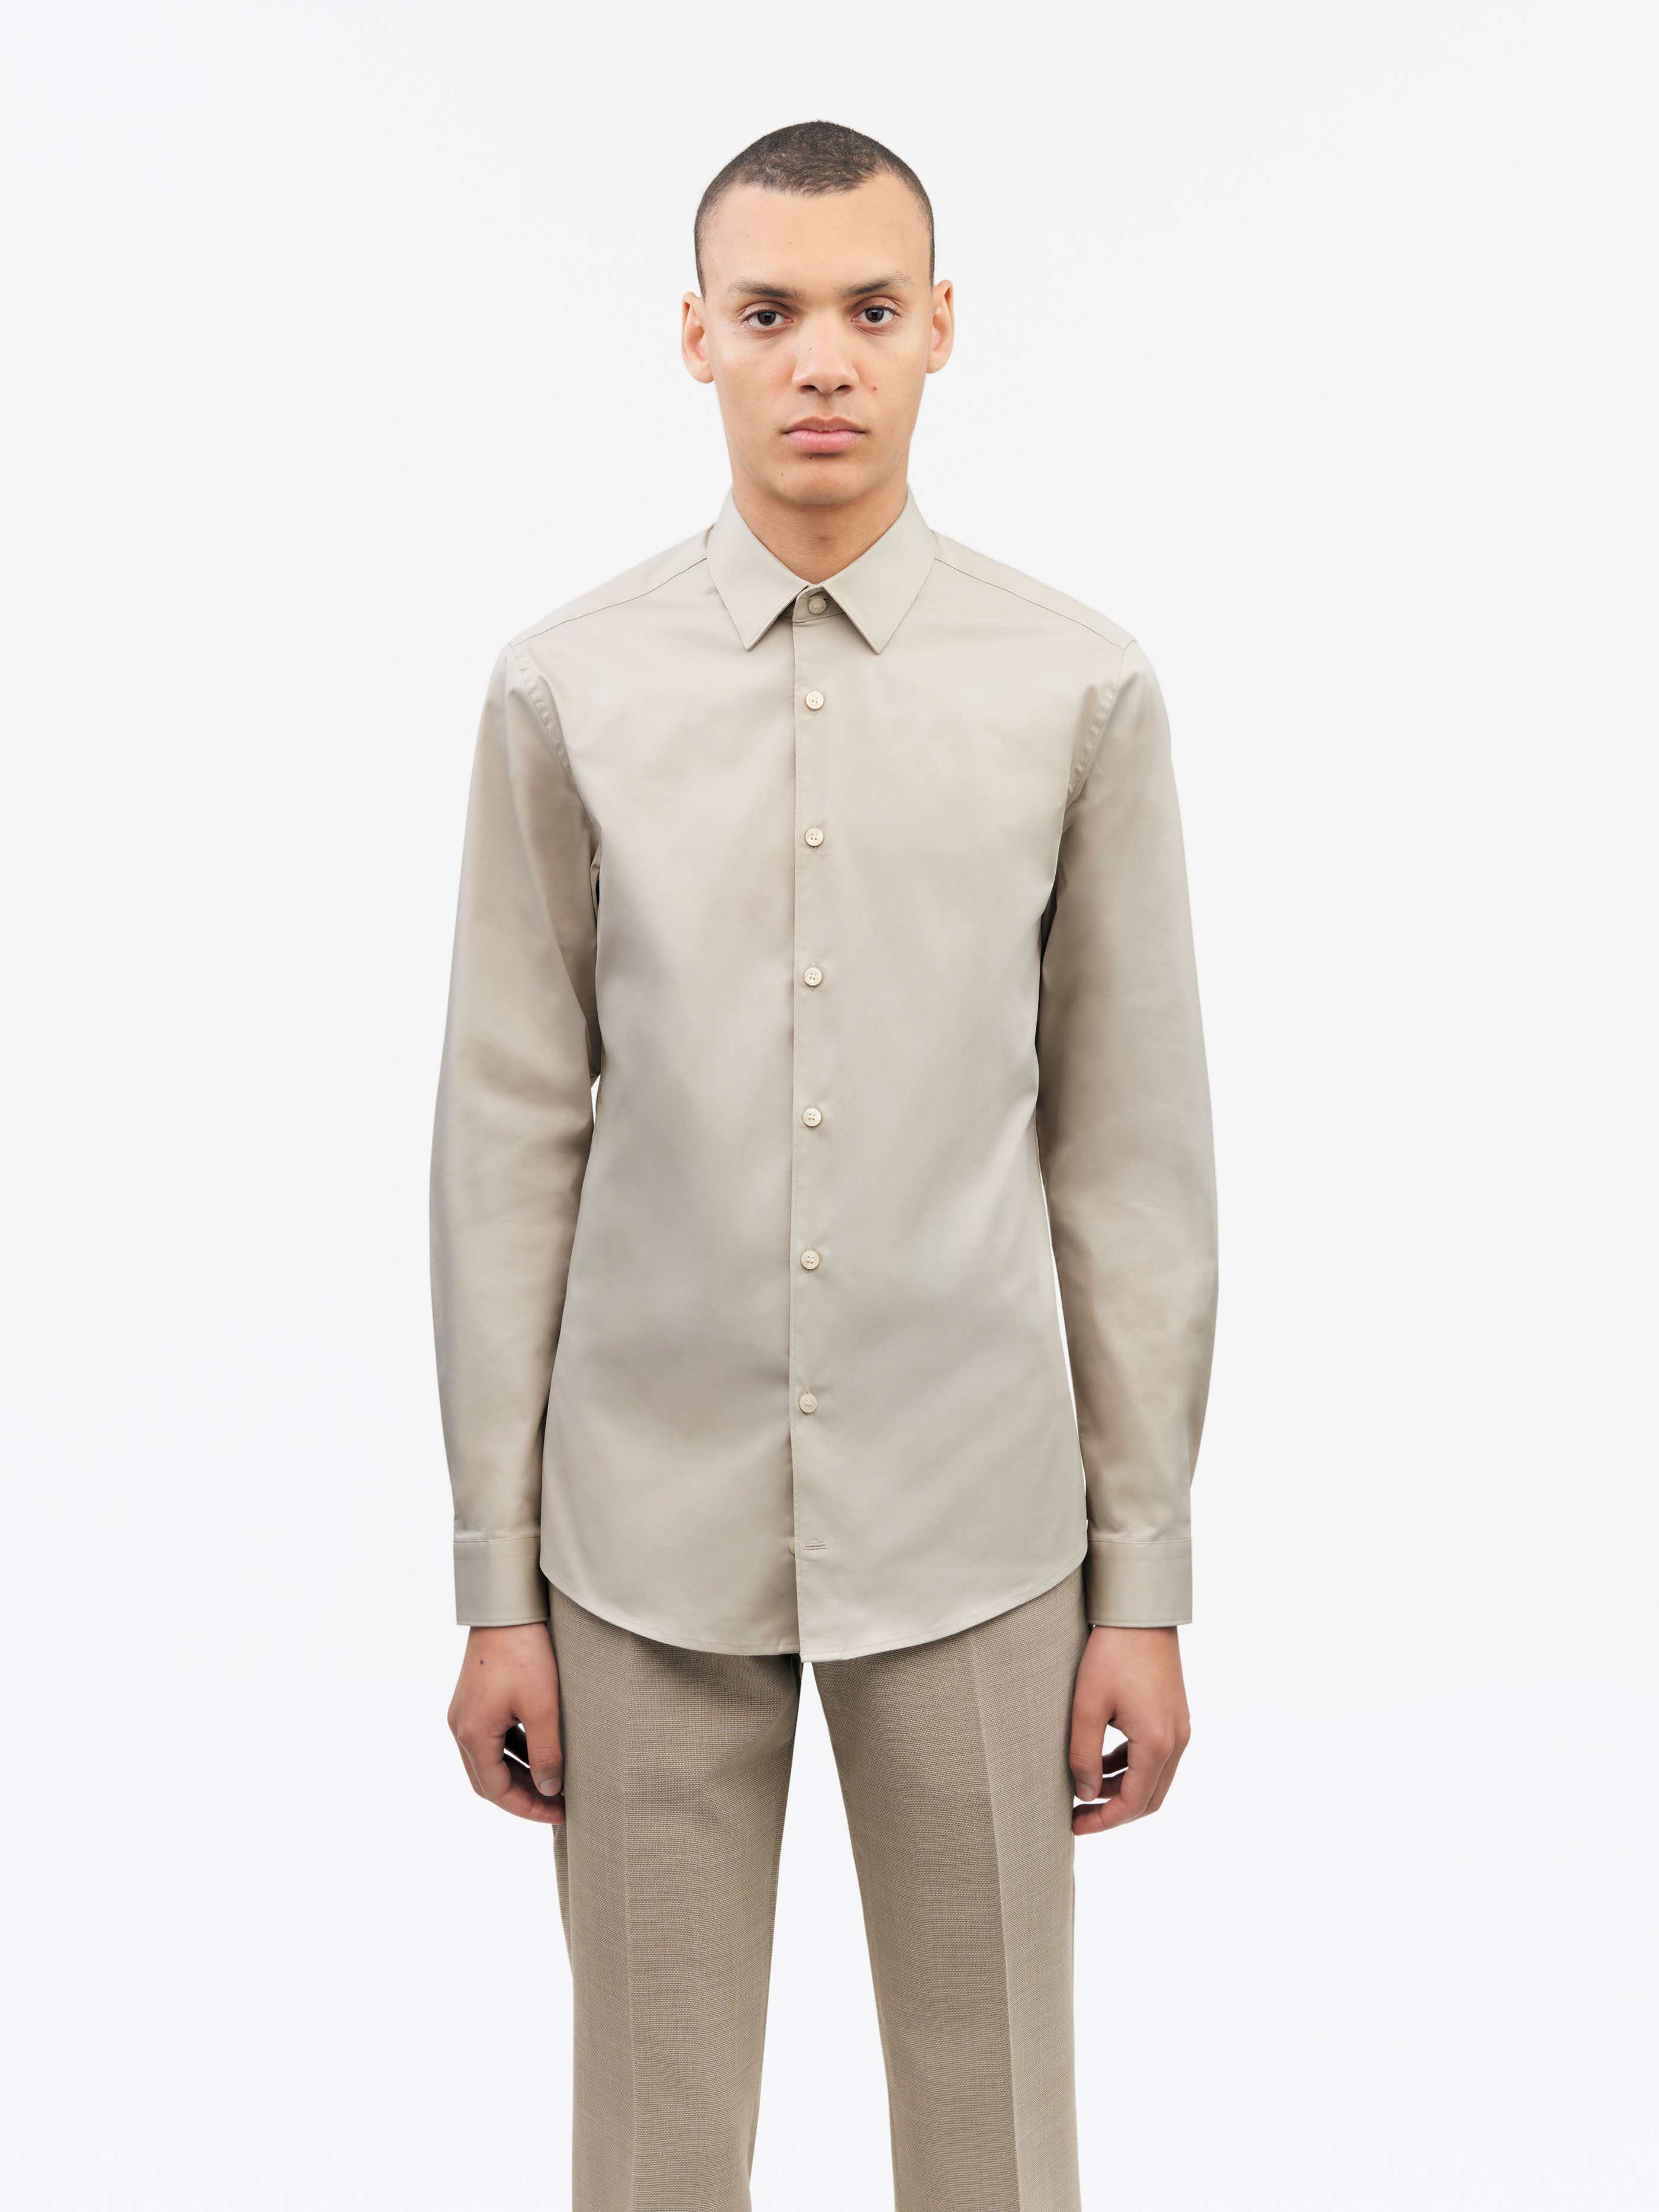 TIGER OF SWEDEN Filbrodie Shirt in Beige T68997033 1FA-STRING FROM EIGHTYWINGOLD - OFFICIAL BRAND PARTNER